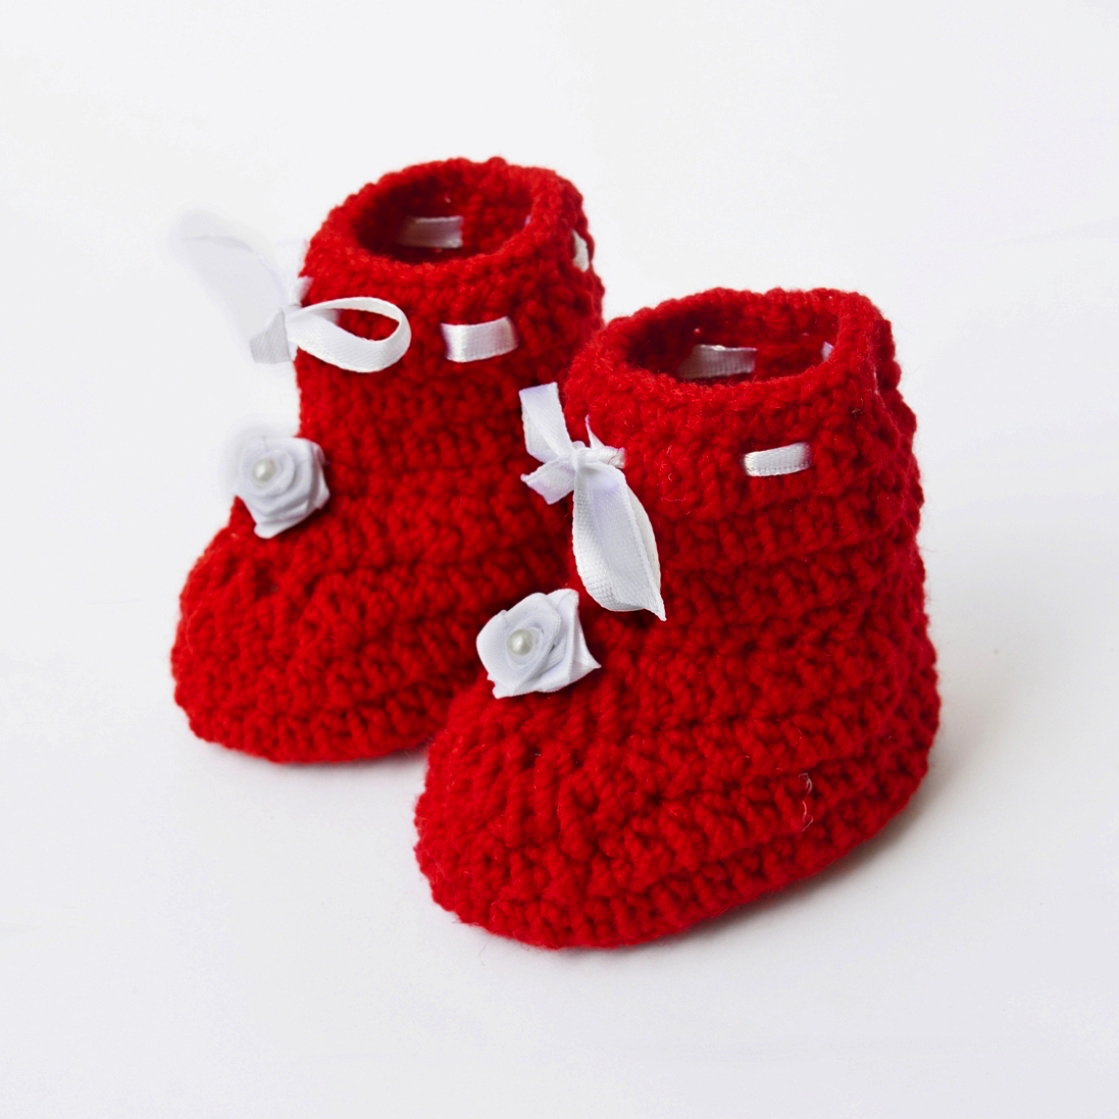 Crochet Baby Booties - Red with flower